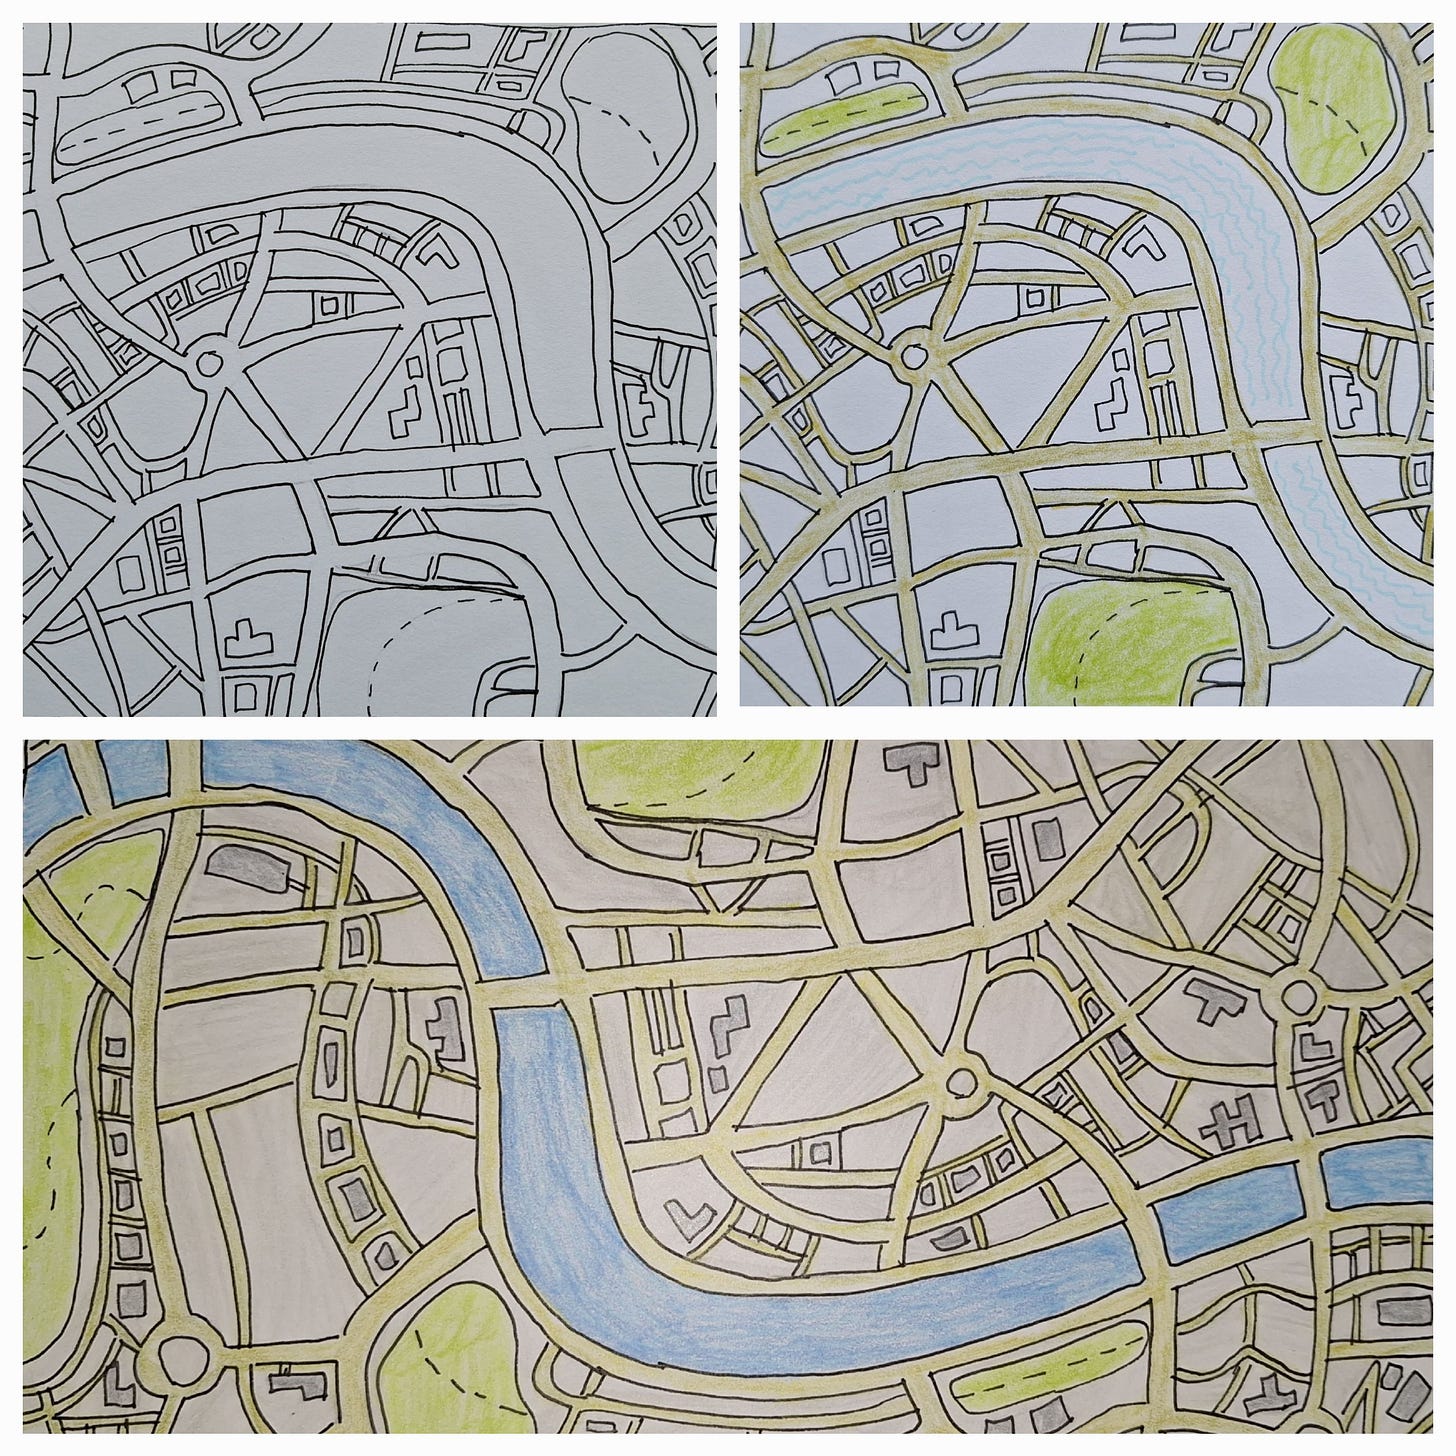 Collage of 3 versions of a hand drawn map, with only outlines, green spaces and a river marked, and roads and buildings highlighted.